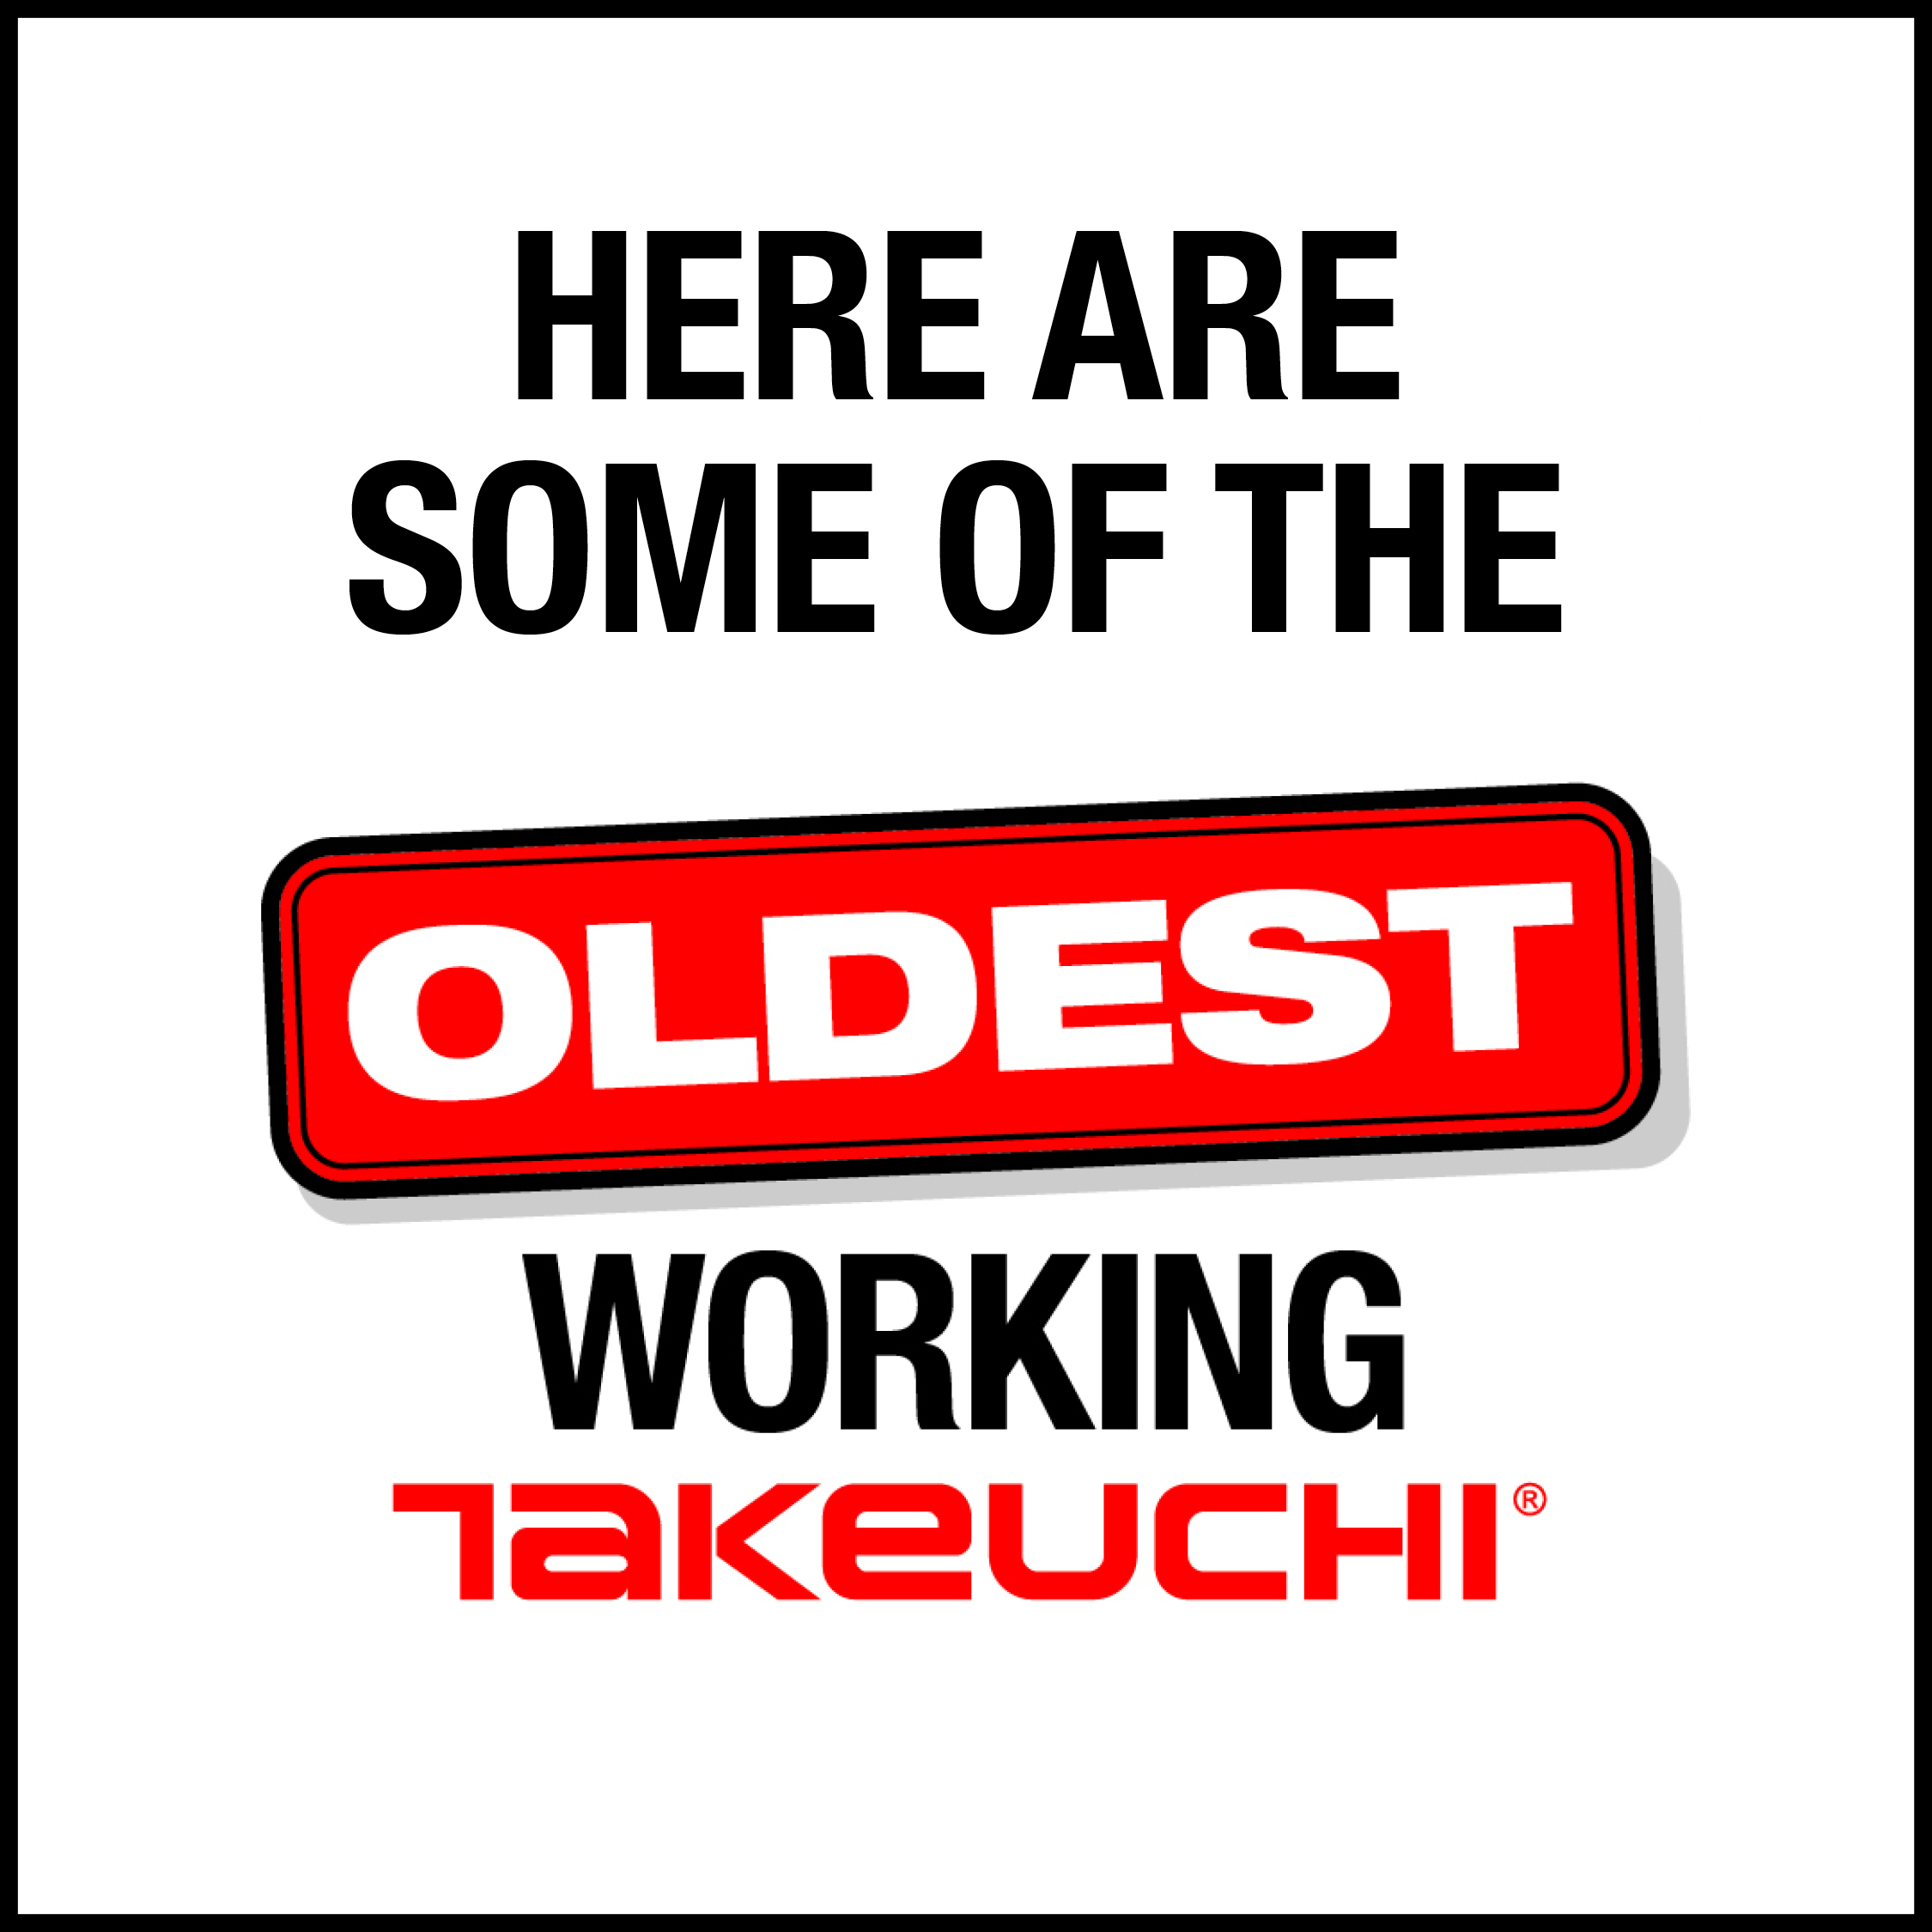 image with text here are some of the oldest working takeuchi